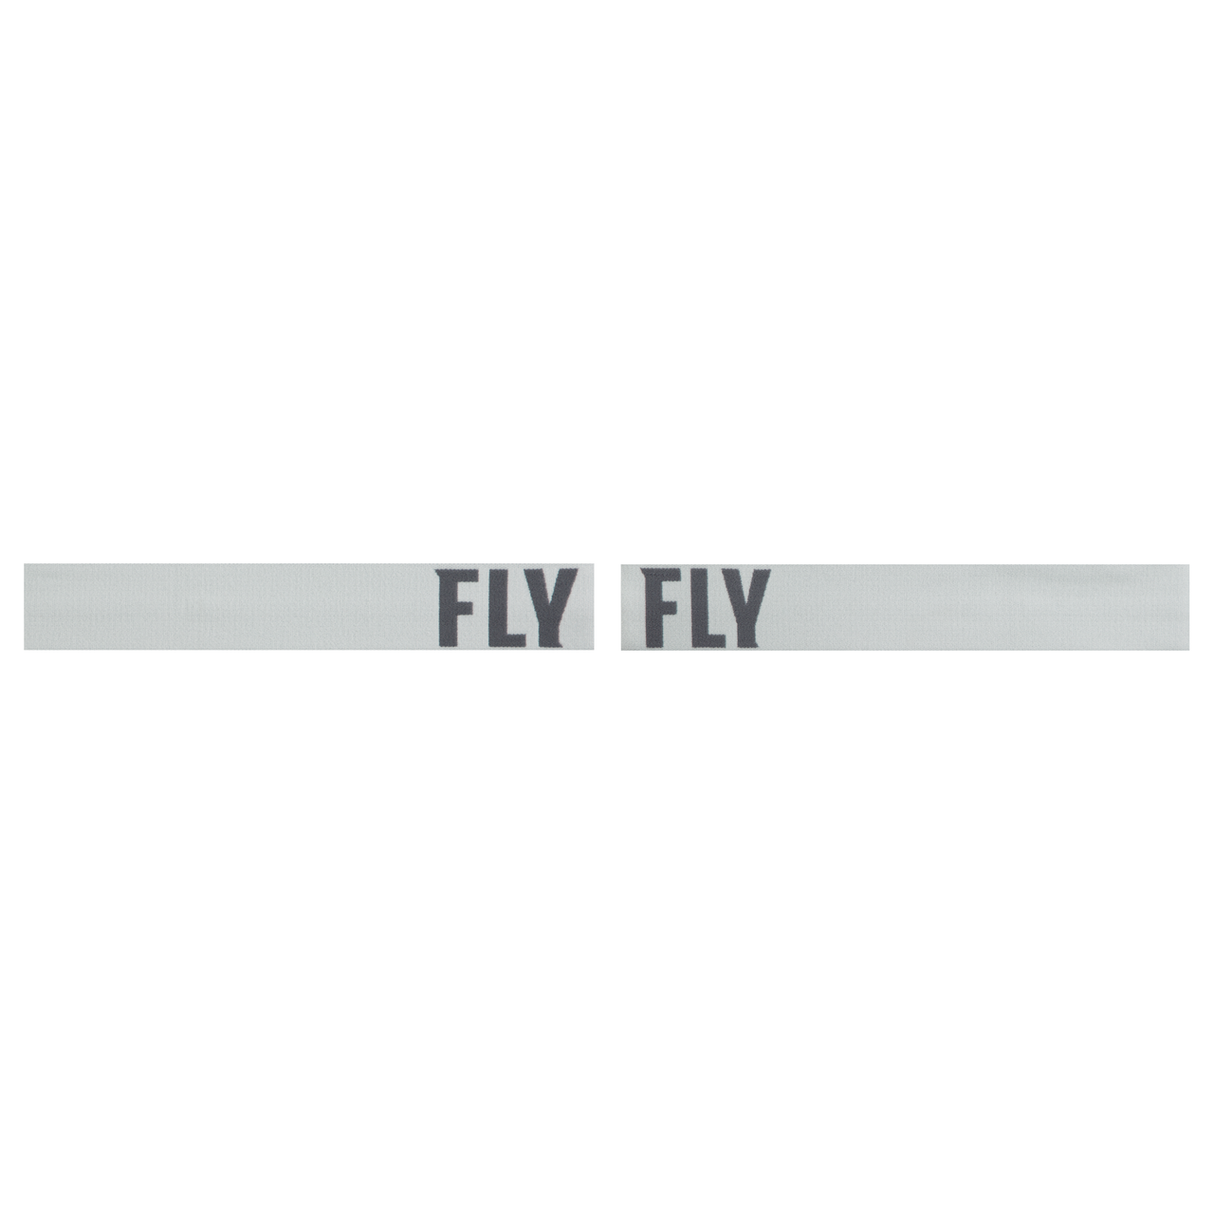 FLY RACING FLY 2024 FOCUS GOGGLE YOUTH